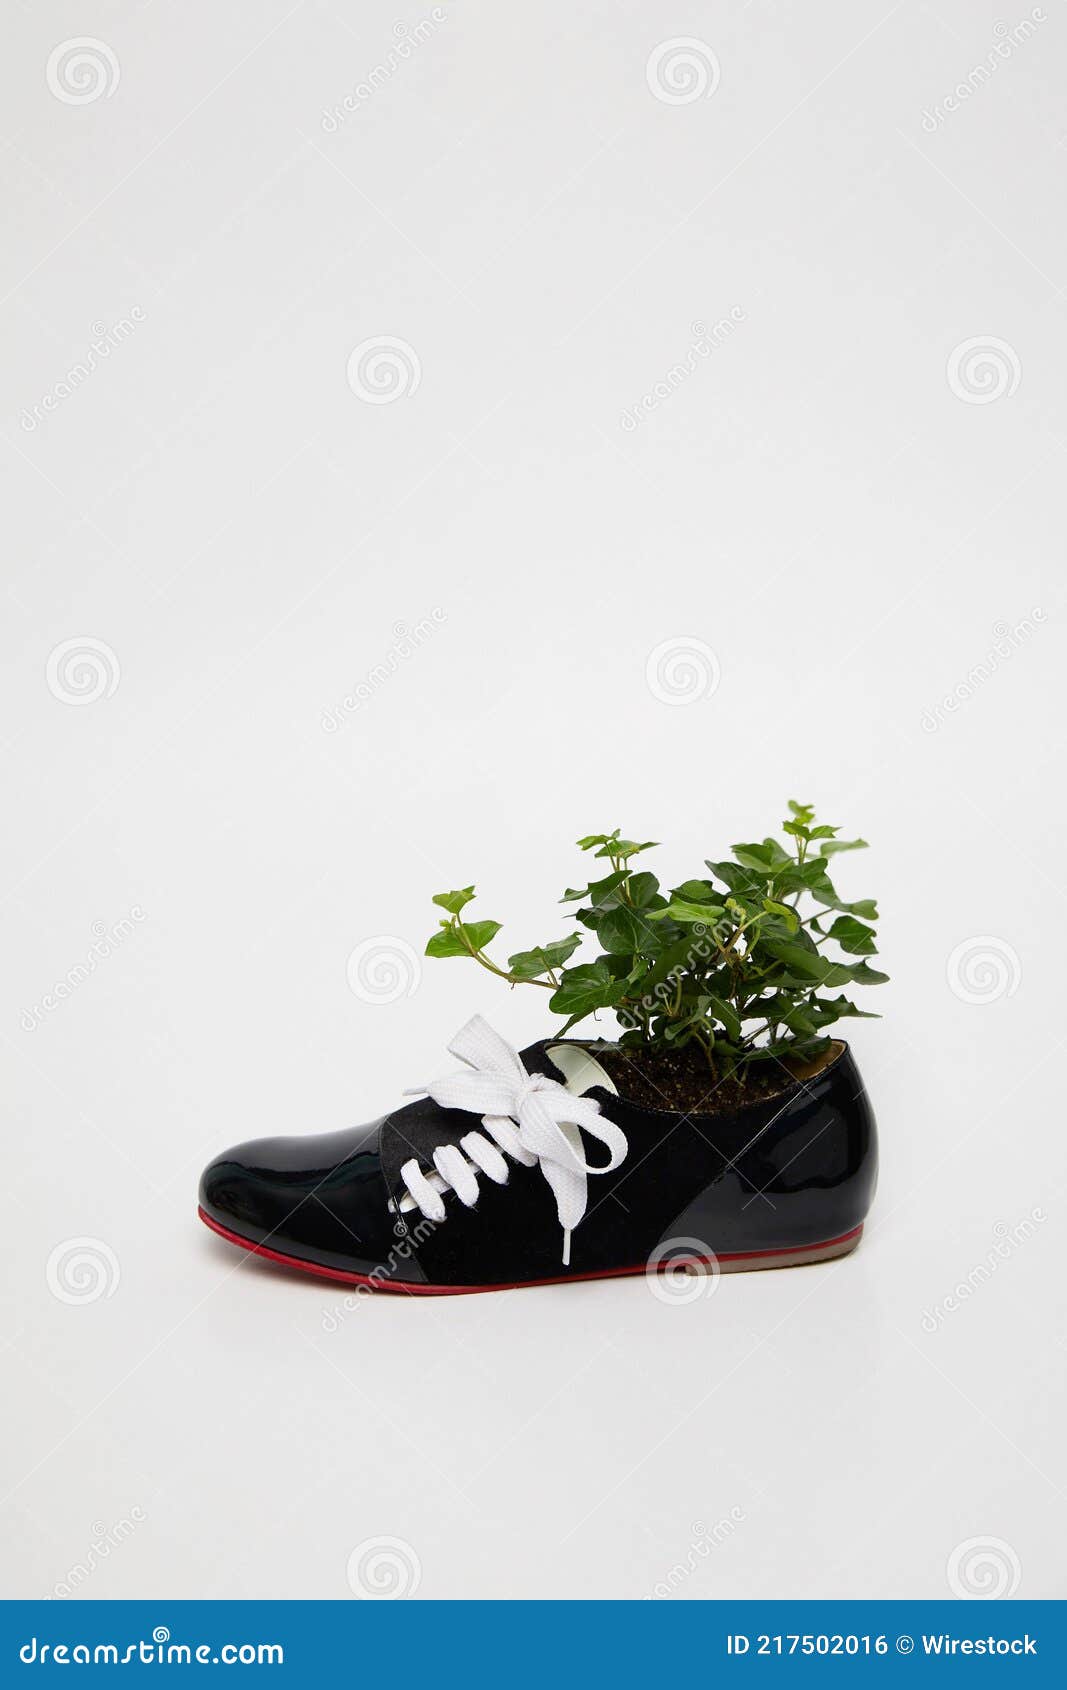 plant in a black and white women shoe